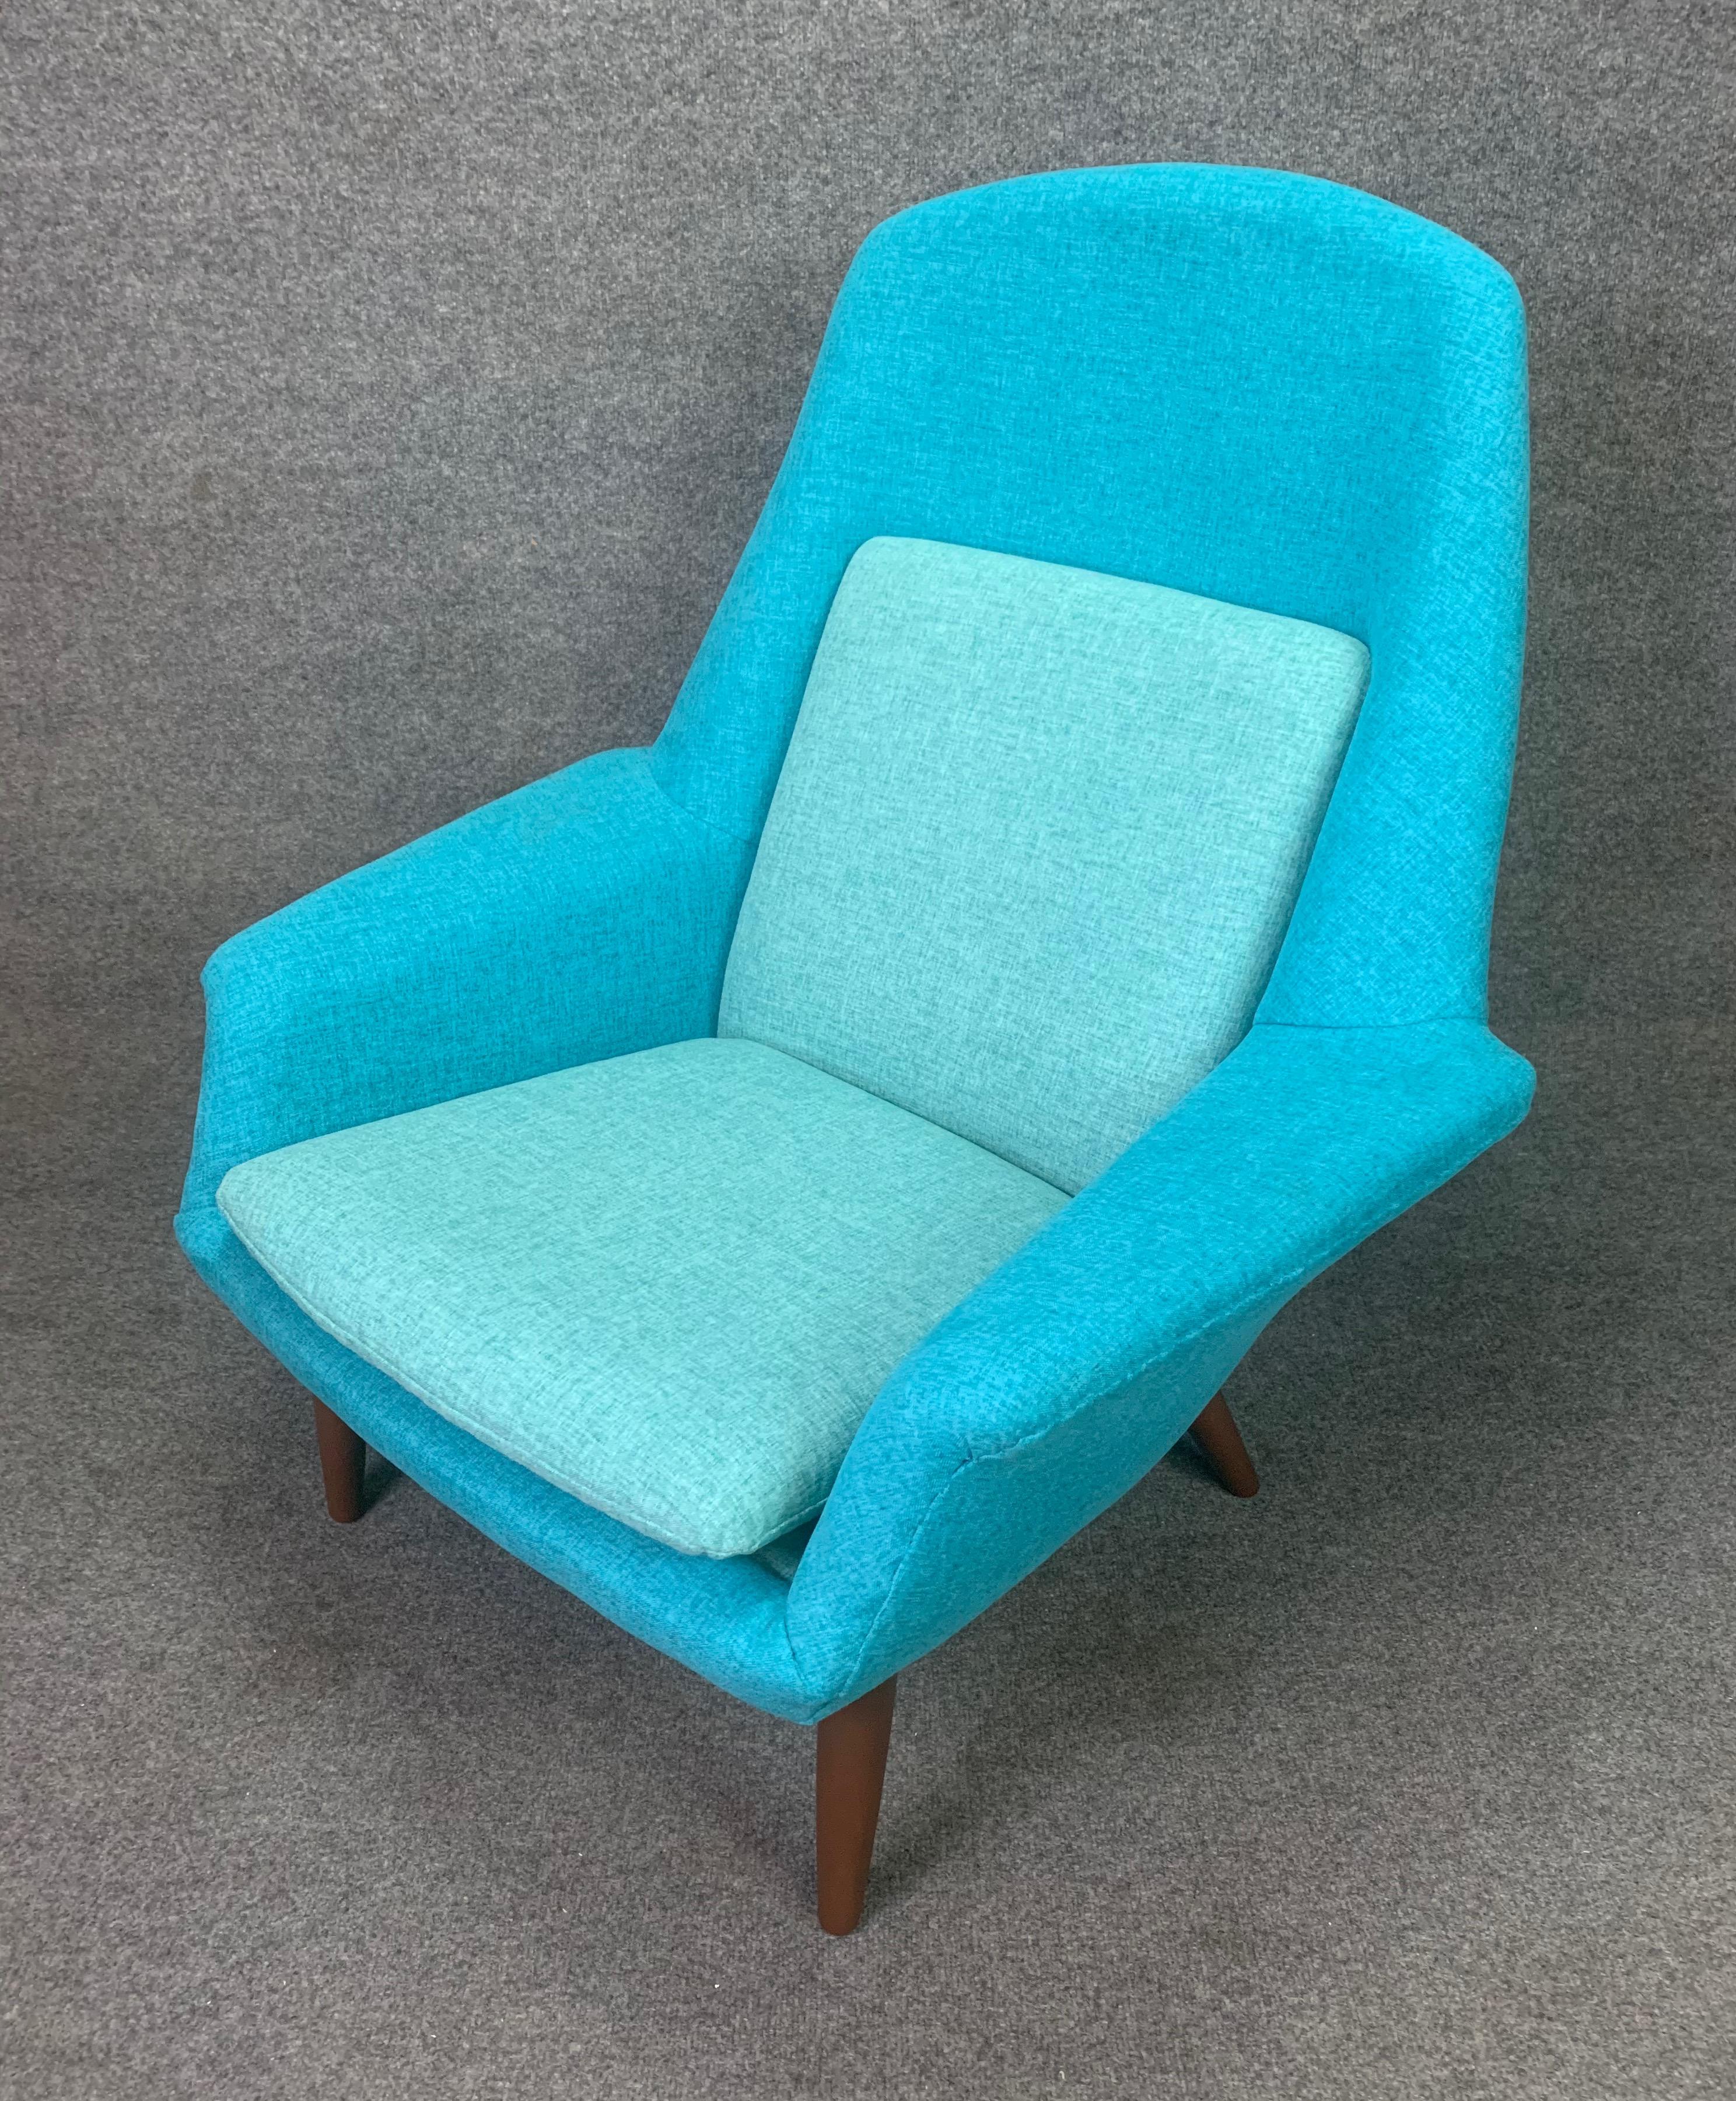 Vintage Scandinavian Mid-Century Modern Lounge Chair by Broderna Anderssons In Good Condition For Sale In San Marcos, CA